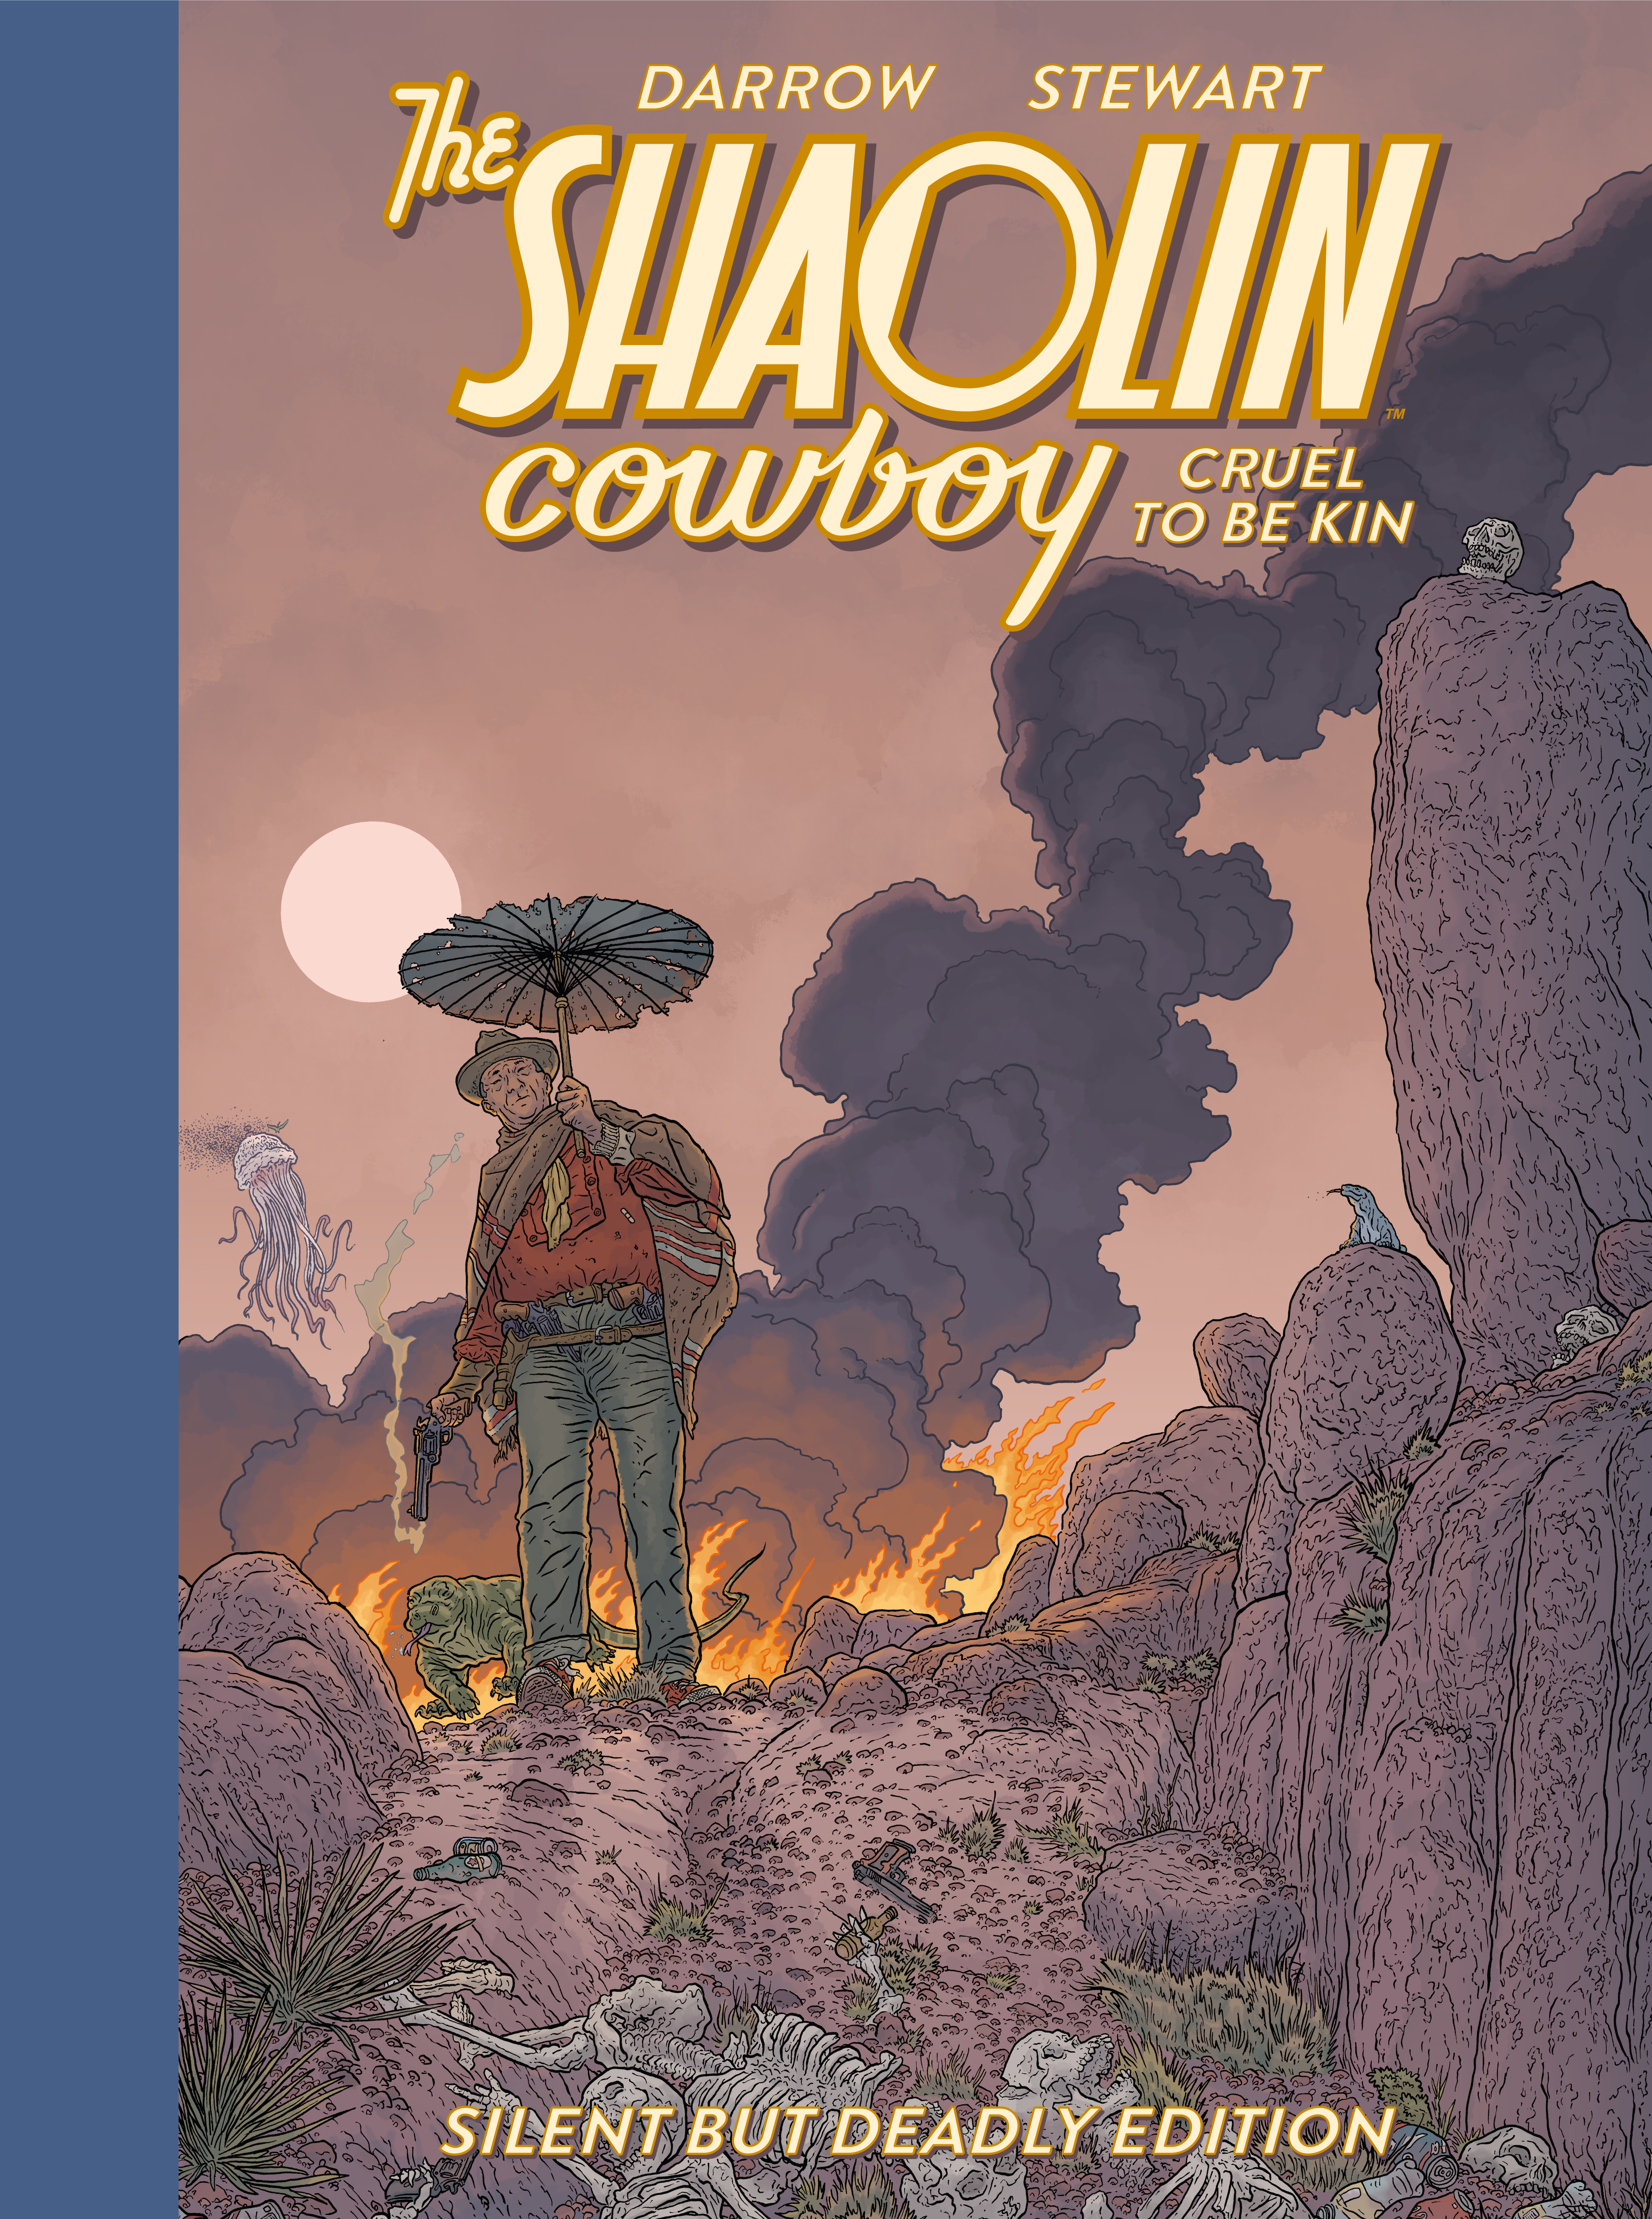 SHAOLIN COWBOY: CRUEL TO BE KIN—SILENT BUT DEADLY EDITION